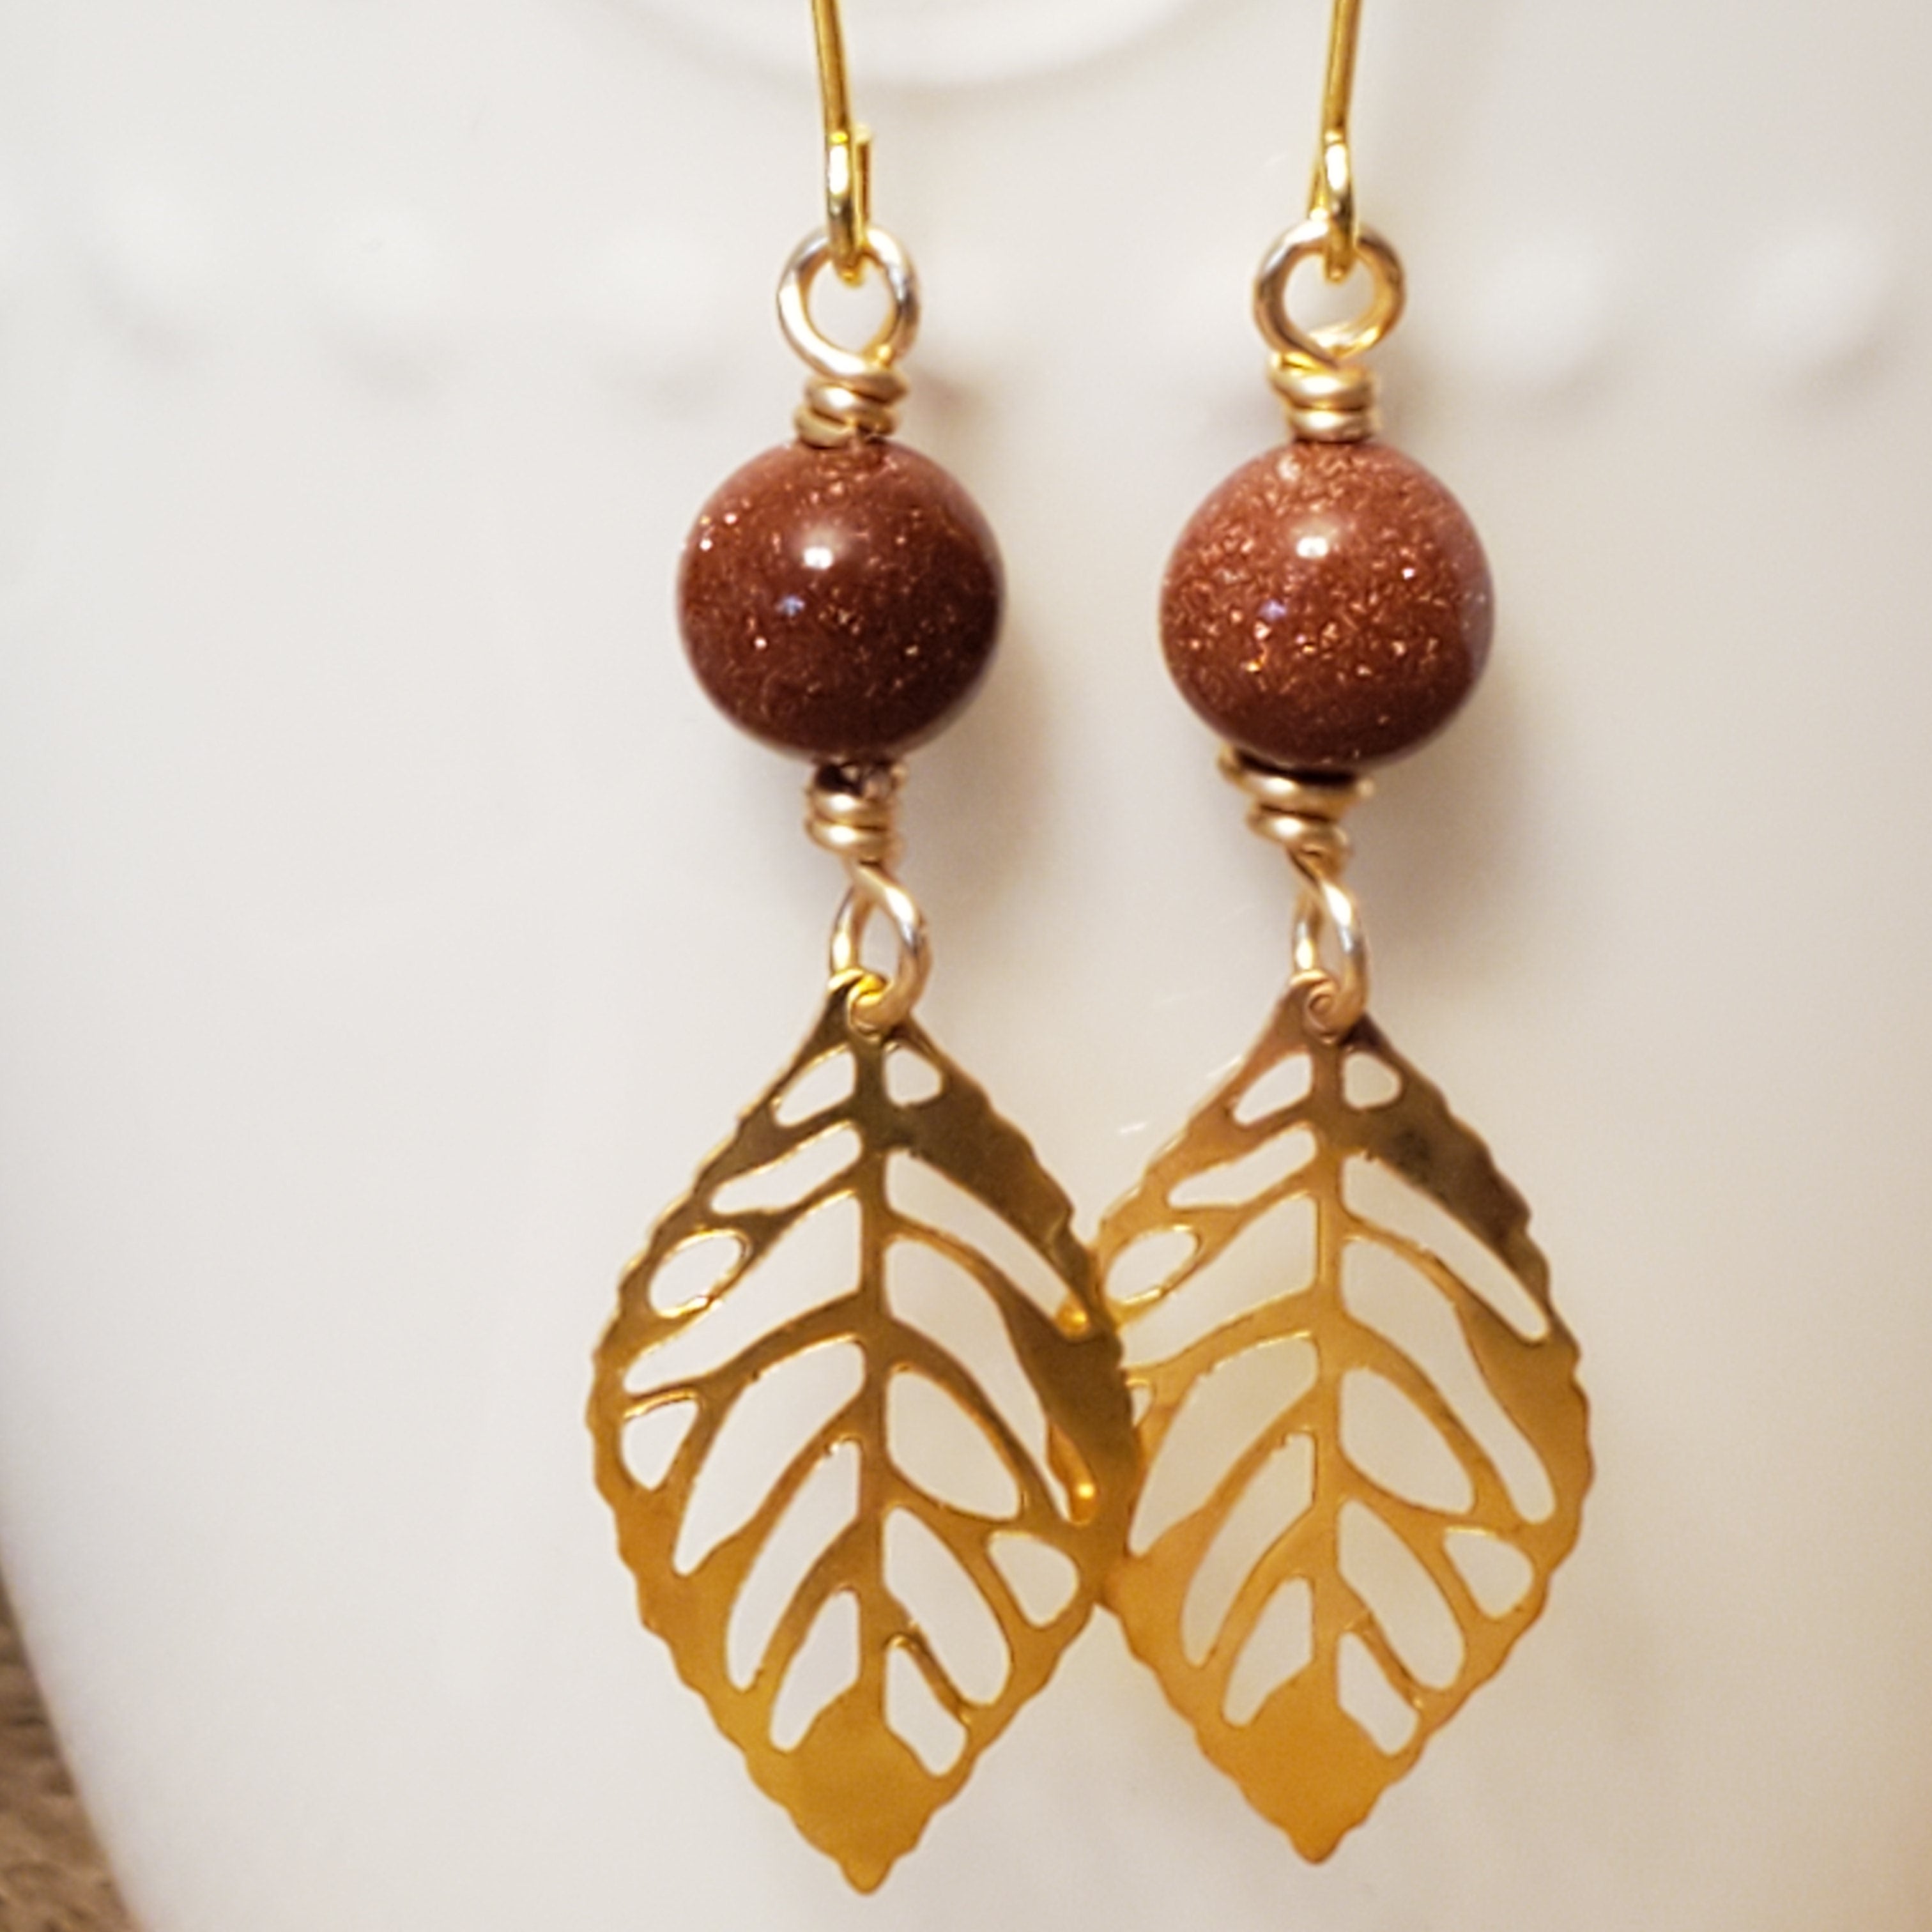 Gold leaf drop earrings with sandstone